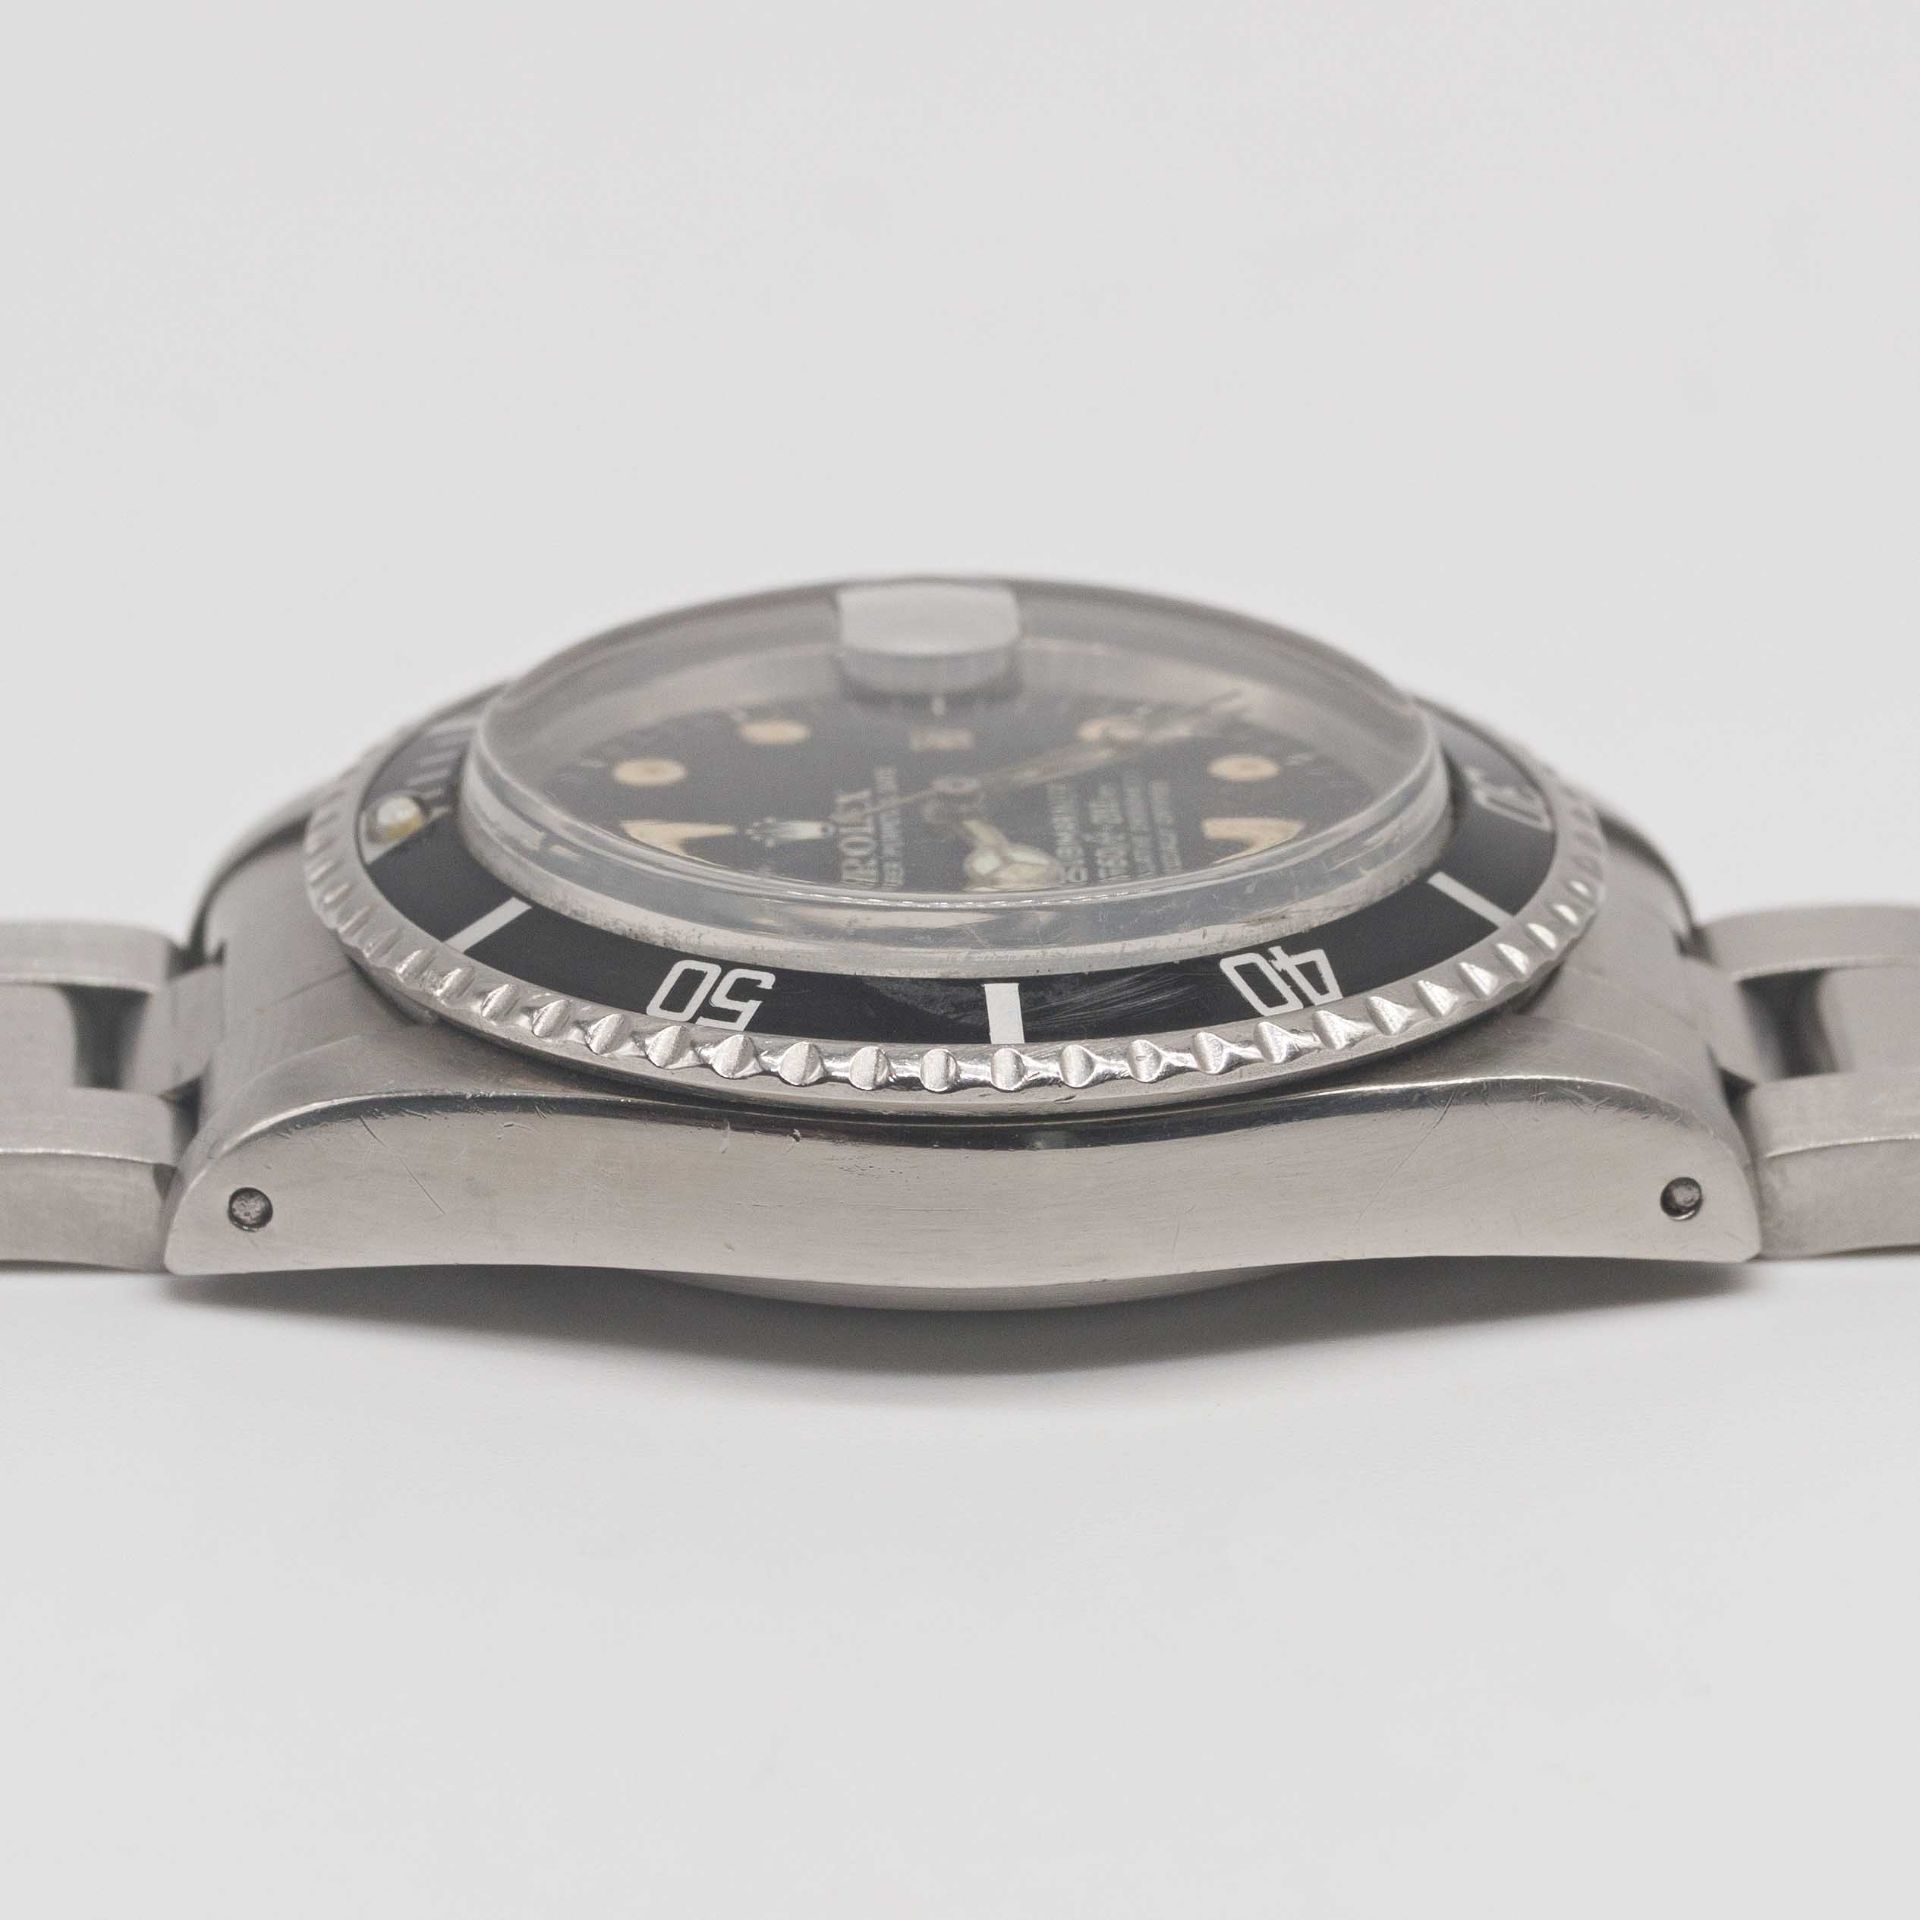 A GENTLEMAN'S STAINLESS STEEL ROLEX OYSTER PERPETUAL DATE SUBMARINER BRACELET WATCH CIRCA 1978, REF. - Image 10 of 10